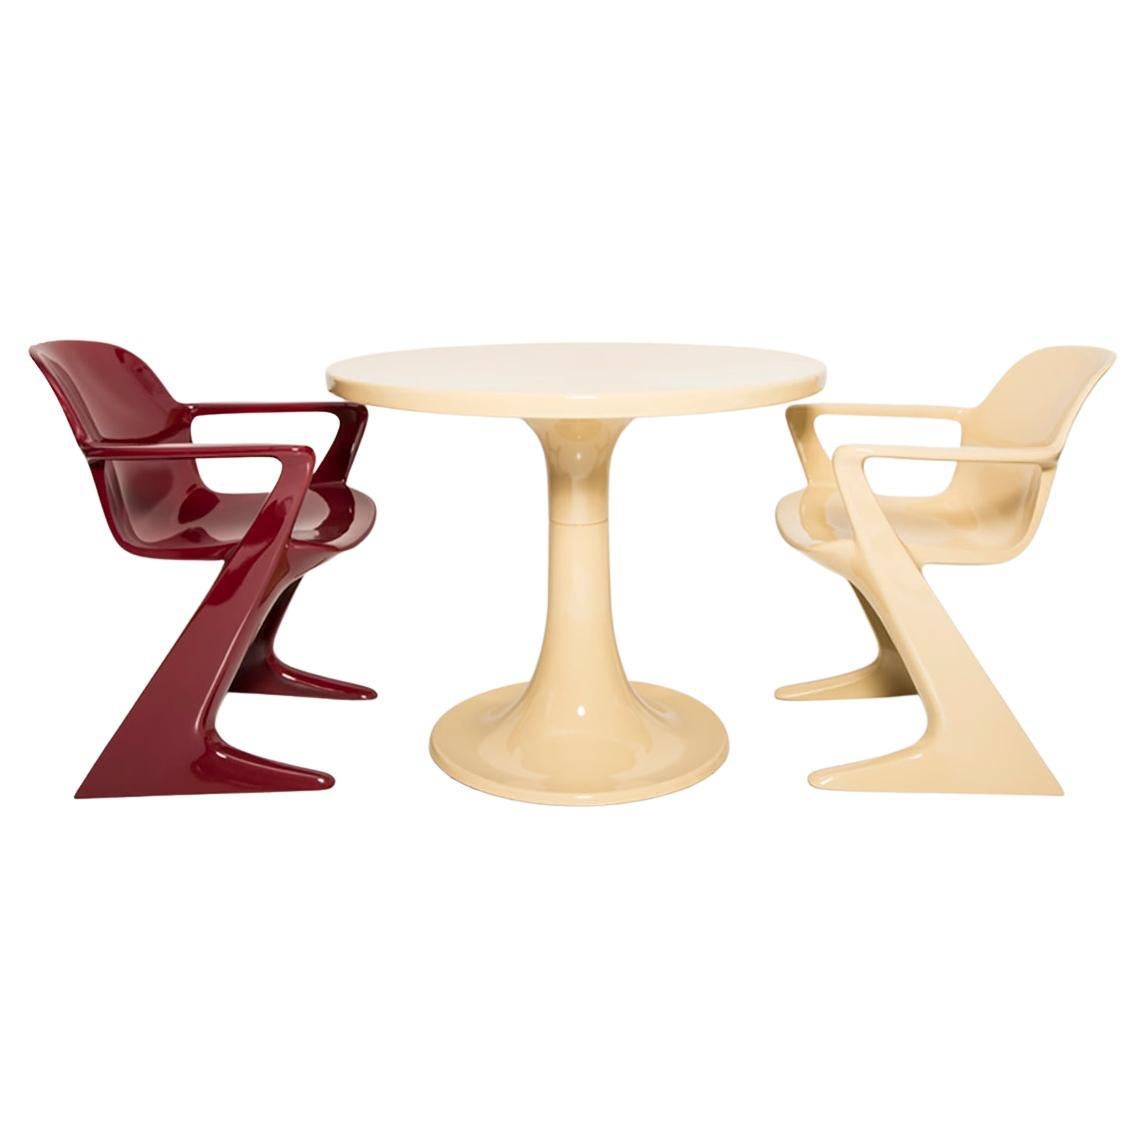 Midcentury Beige and Red Kangaroo Chairs and Table Ernst Moeckl, Germany, 1968